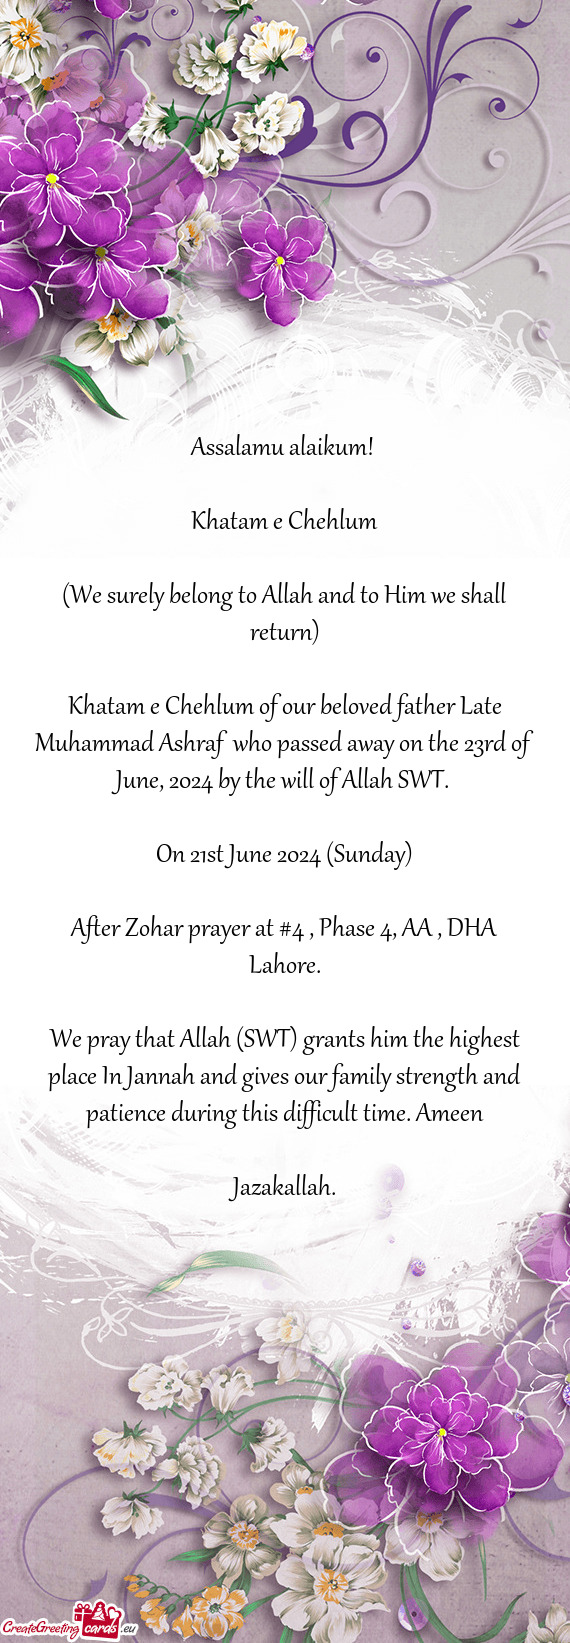 Khatam e Chehlum of our beloved father Late Muhammad Ashraf who passed away on the 23rd of June, 20